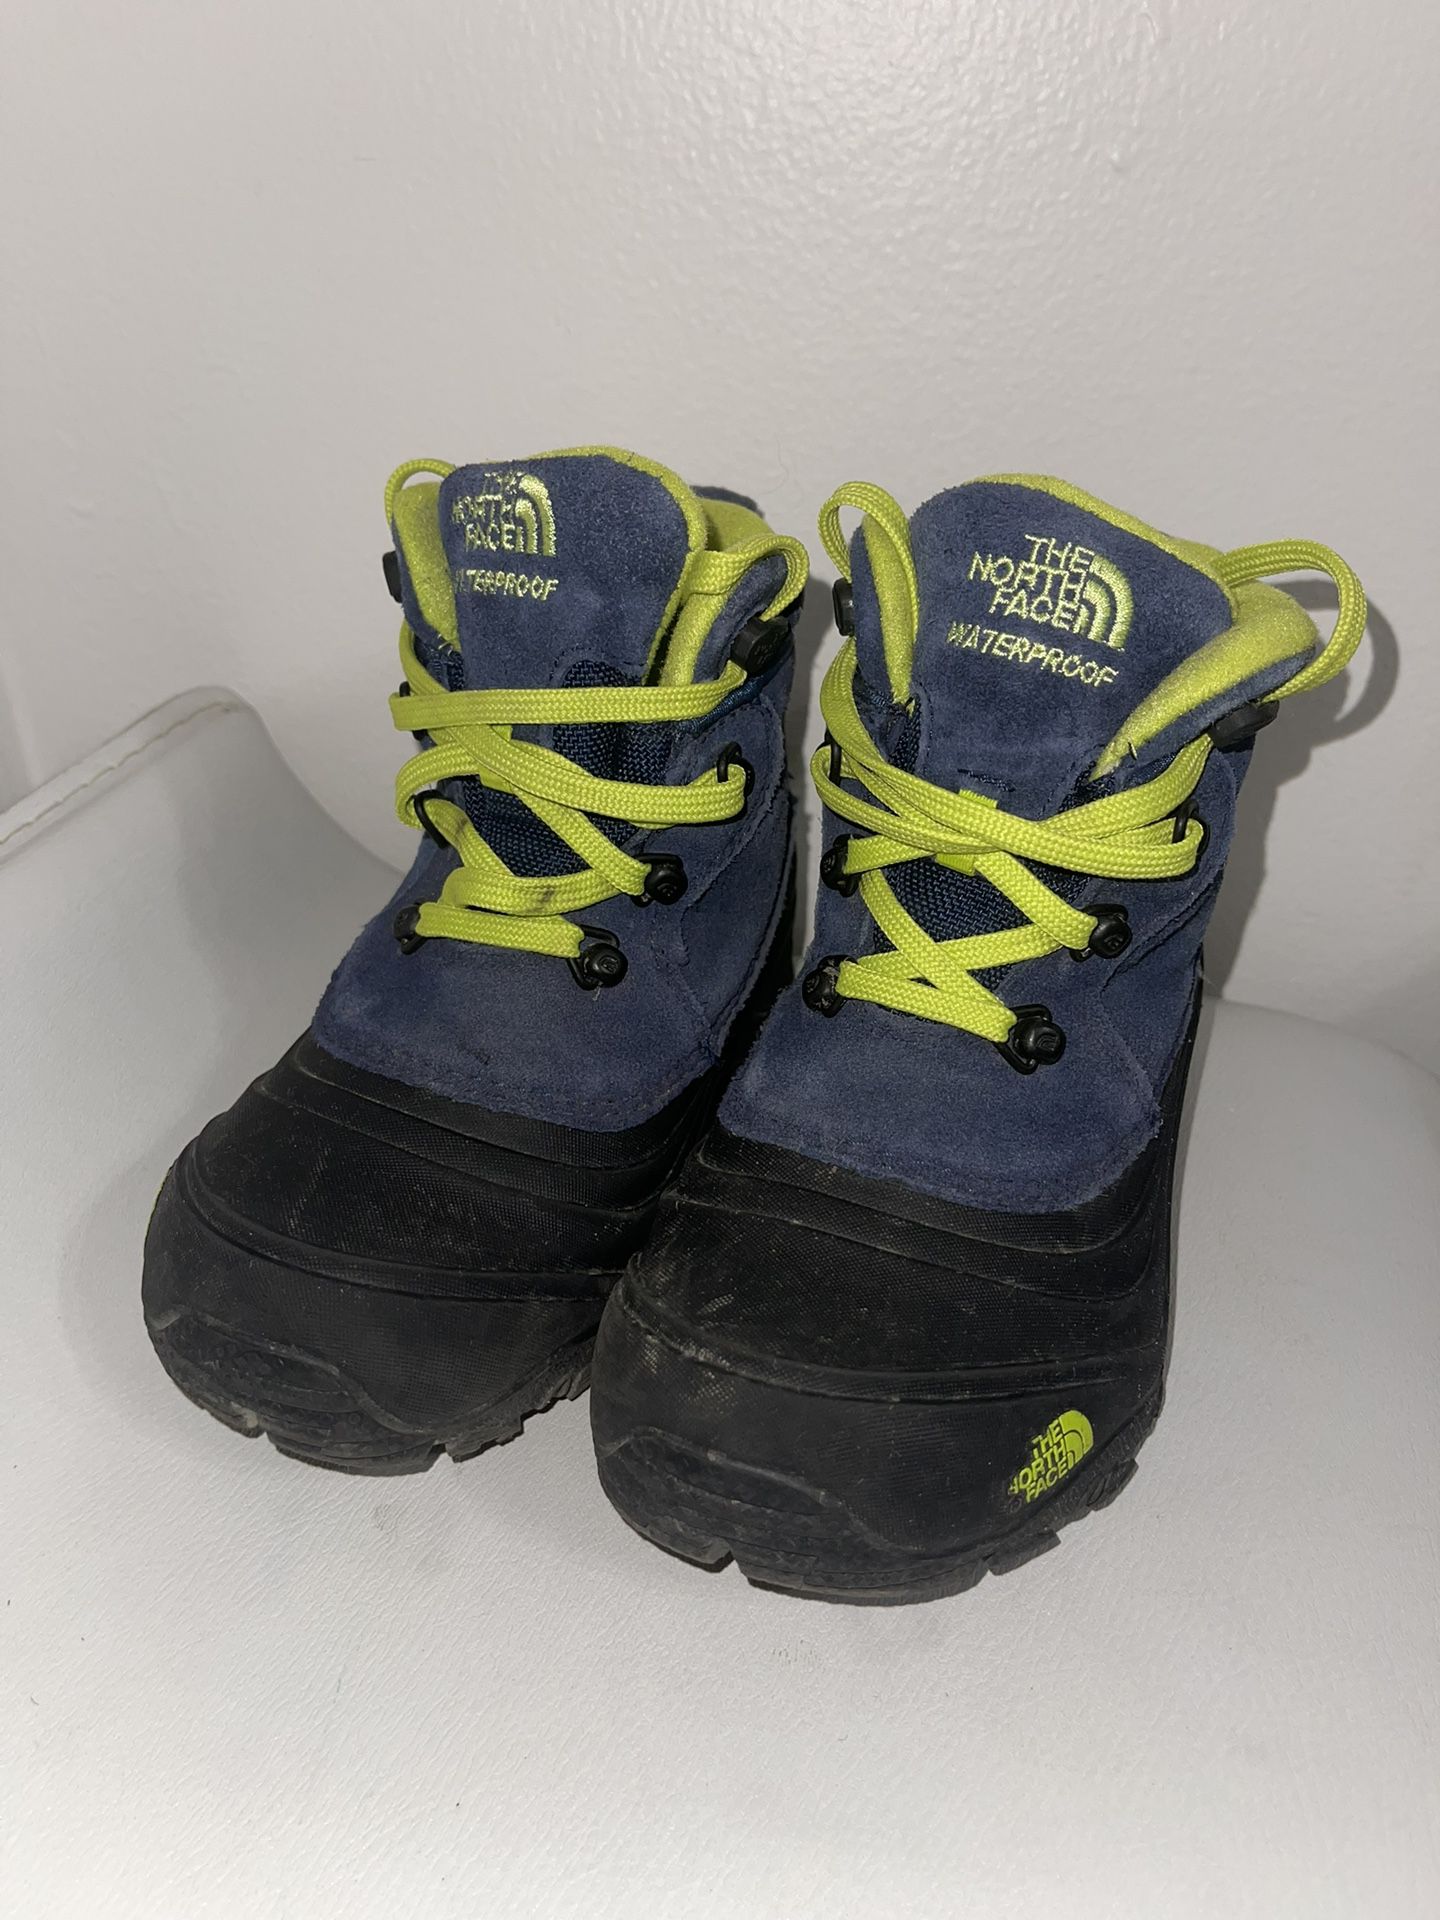 Kids Chilkat North Face Boots